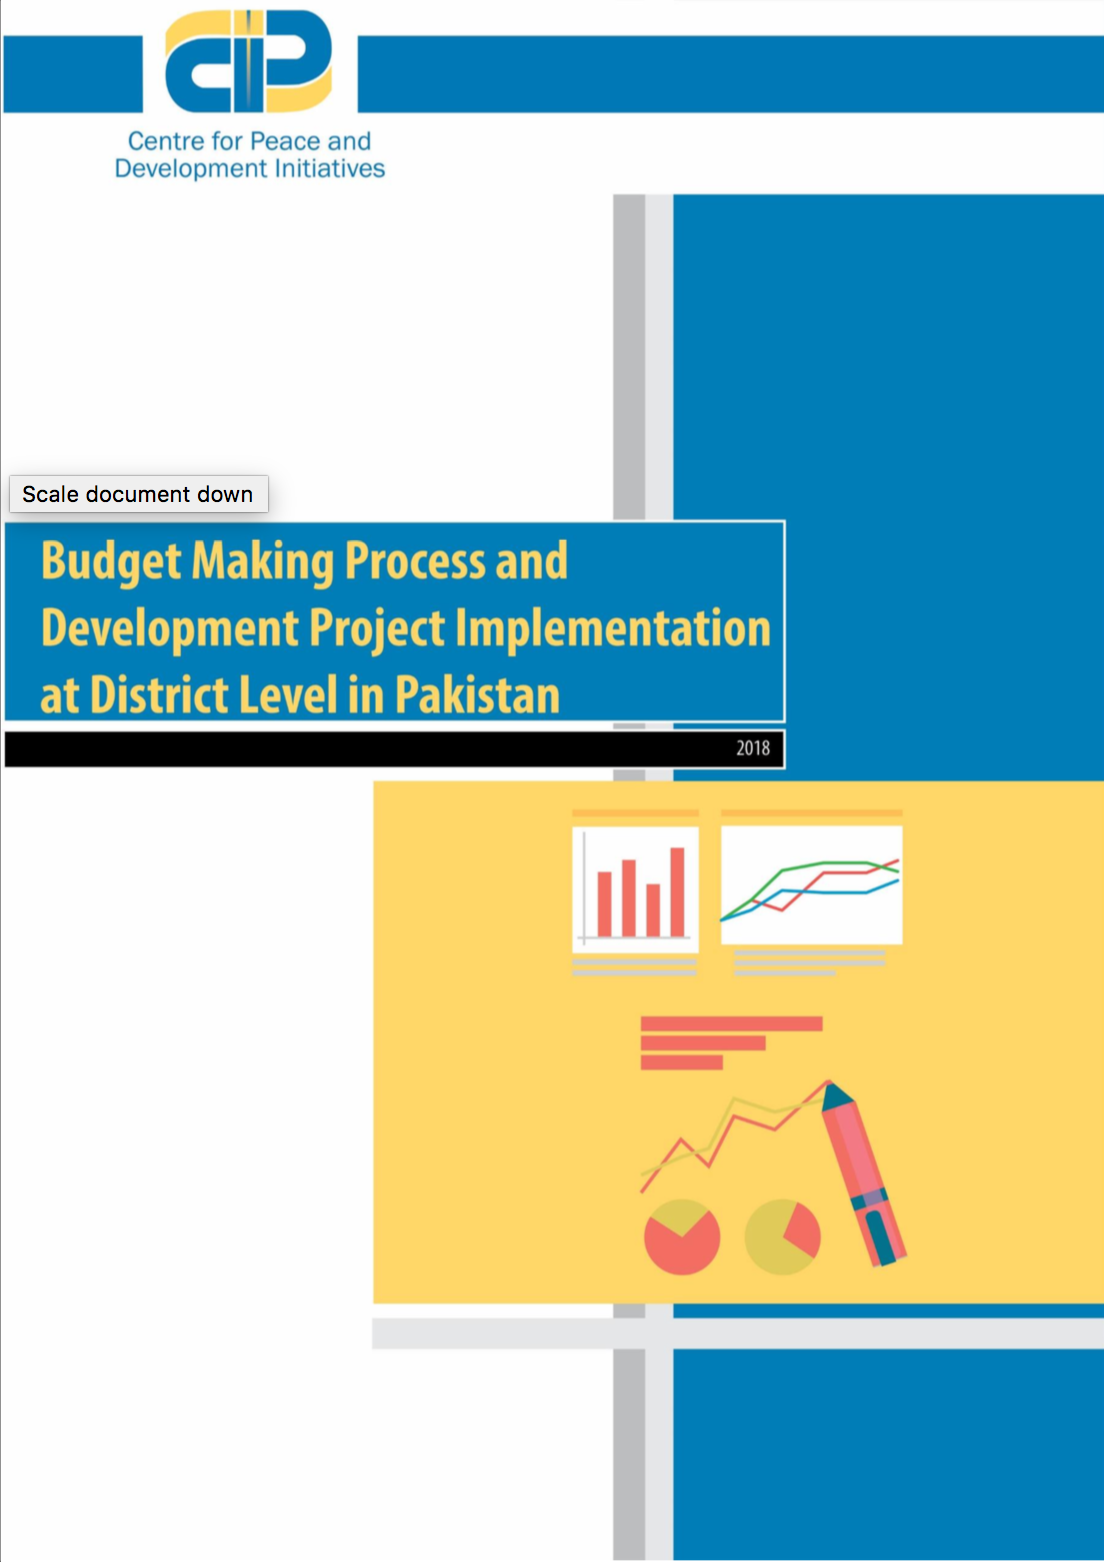 Budget Making Process and Development Project Implementation at District Level in Pakistan